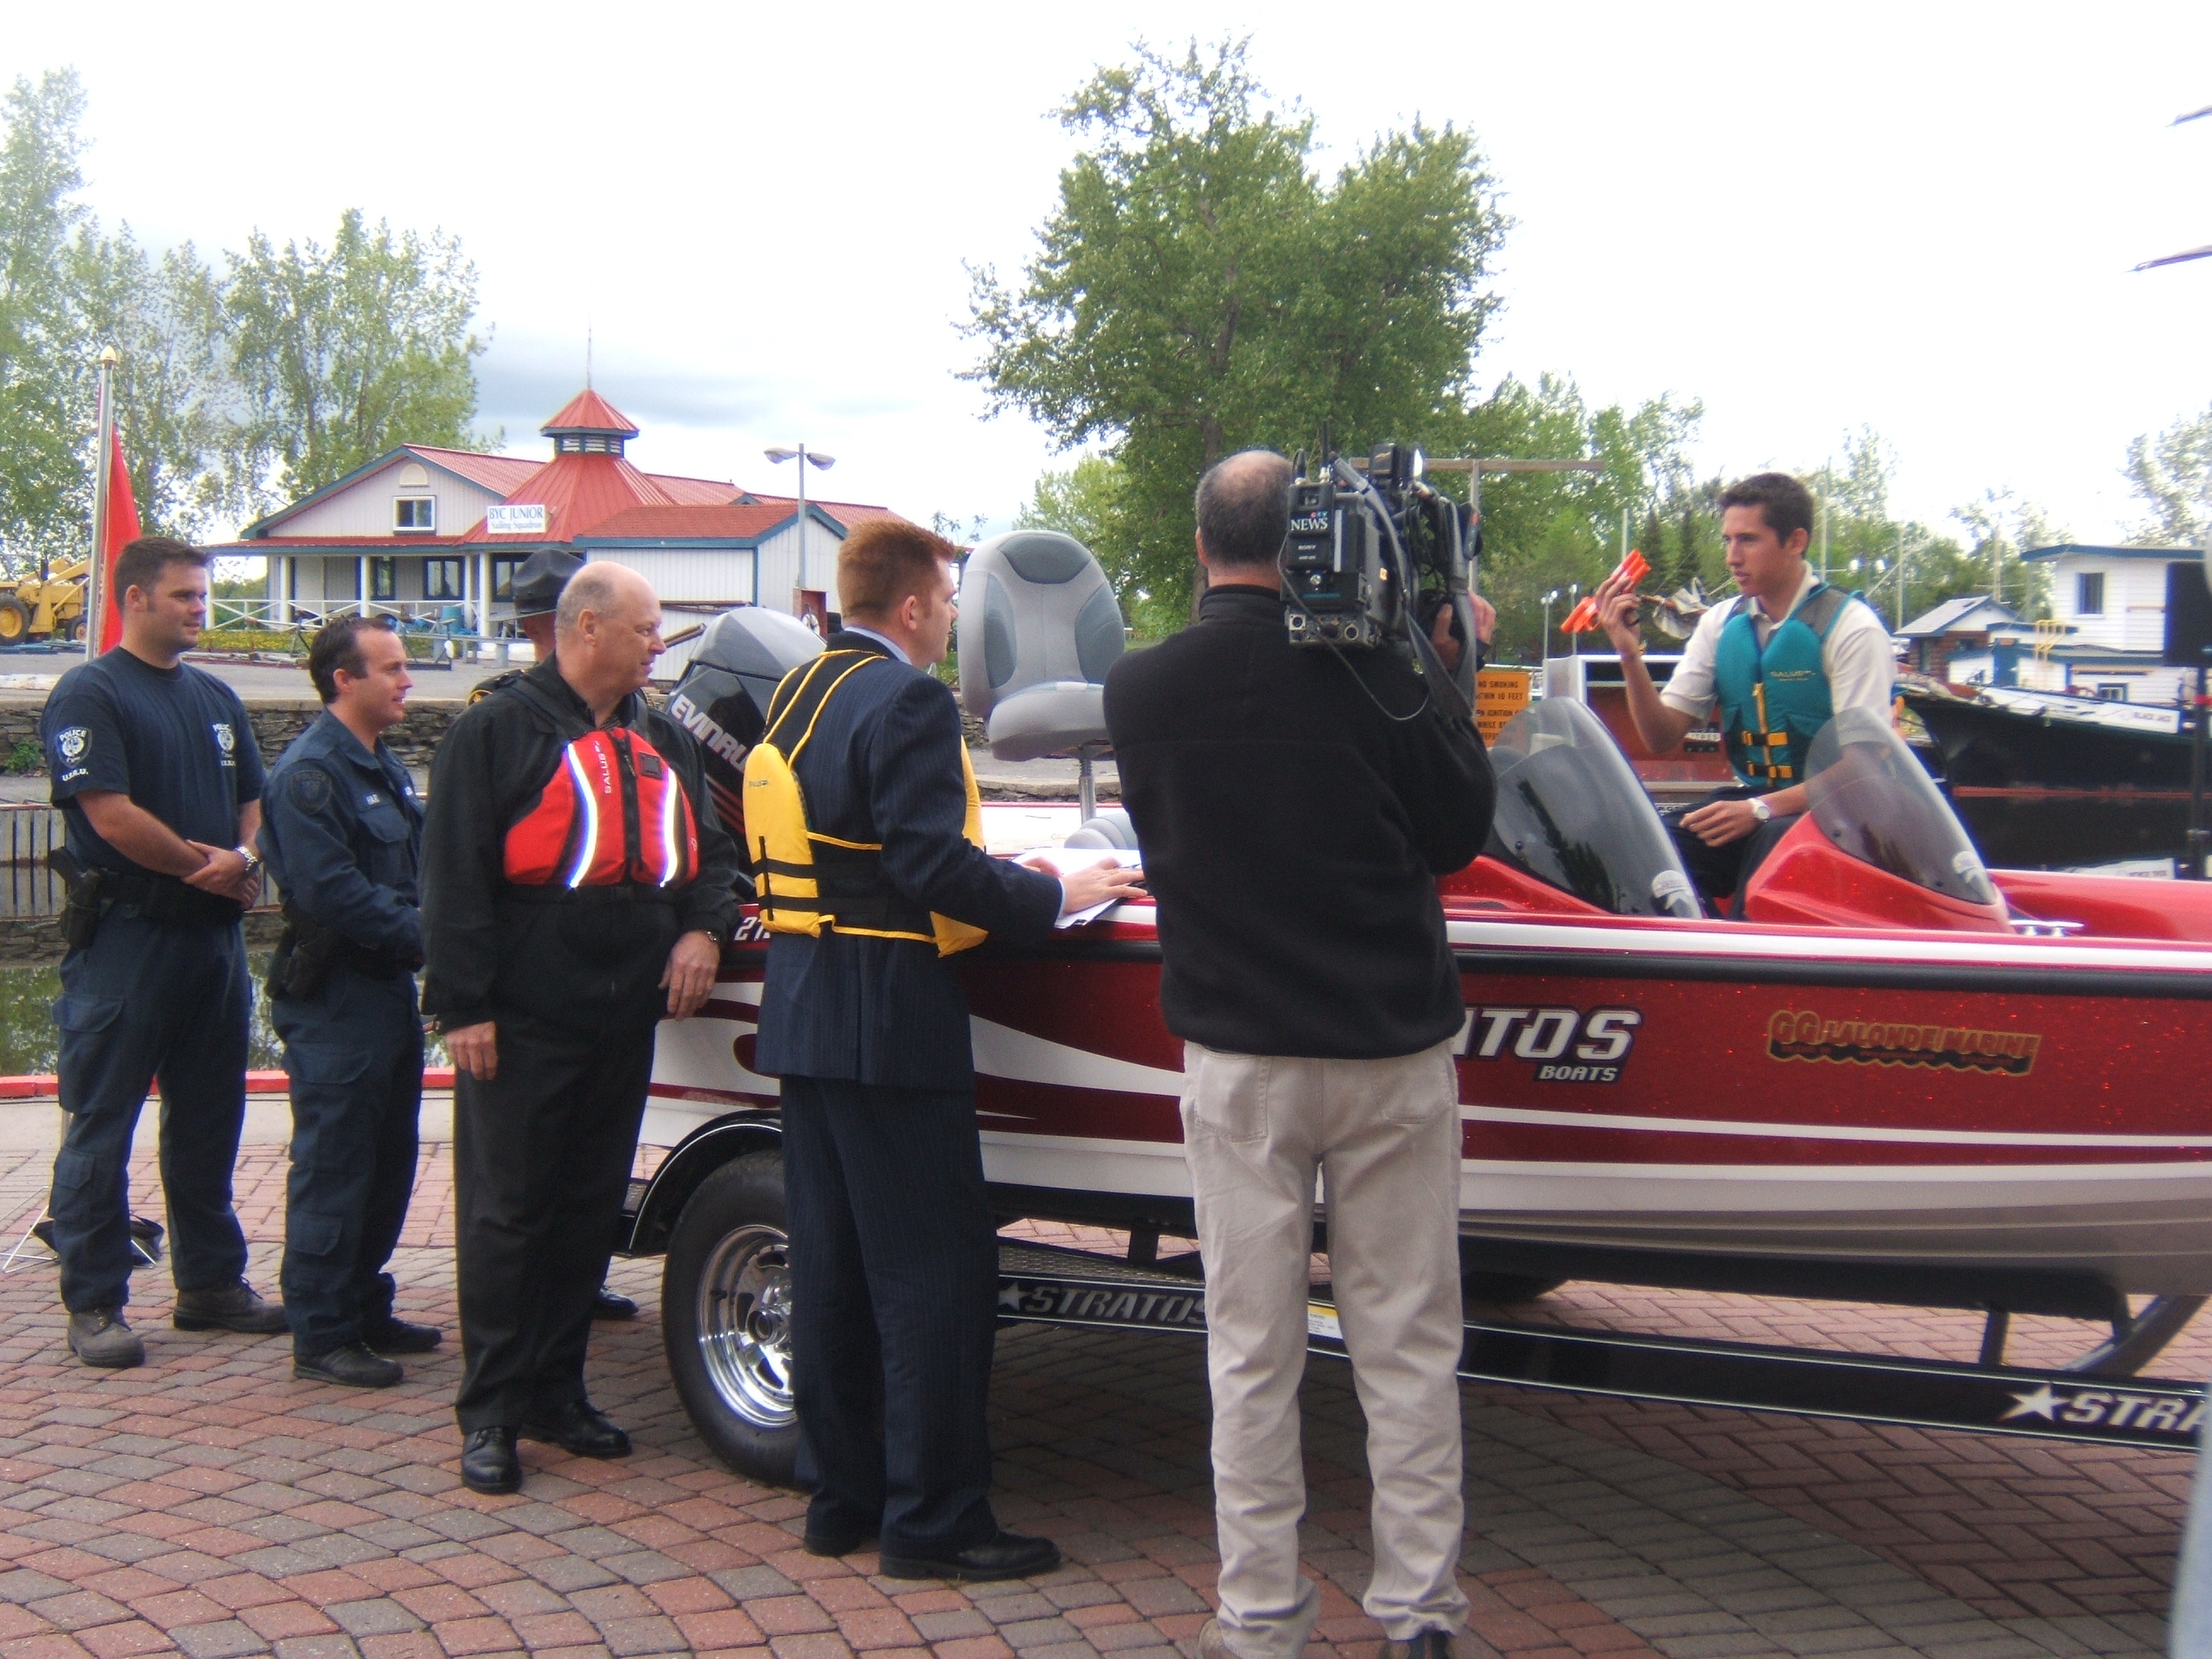 Cameraman records Parliamentary Secretary to the Minister of Transport, Infrastructure and Communities, Brian Jean, and Chair of the Safe Boating Council, Randy Whaley, as they supervise a mock courtesy check of a powerboat.